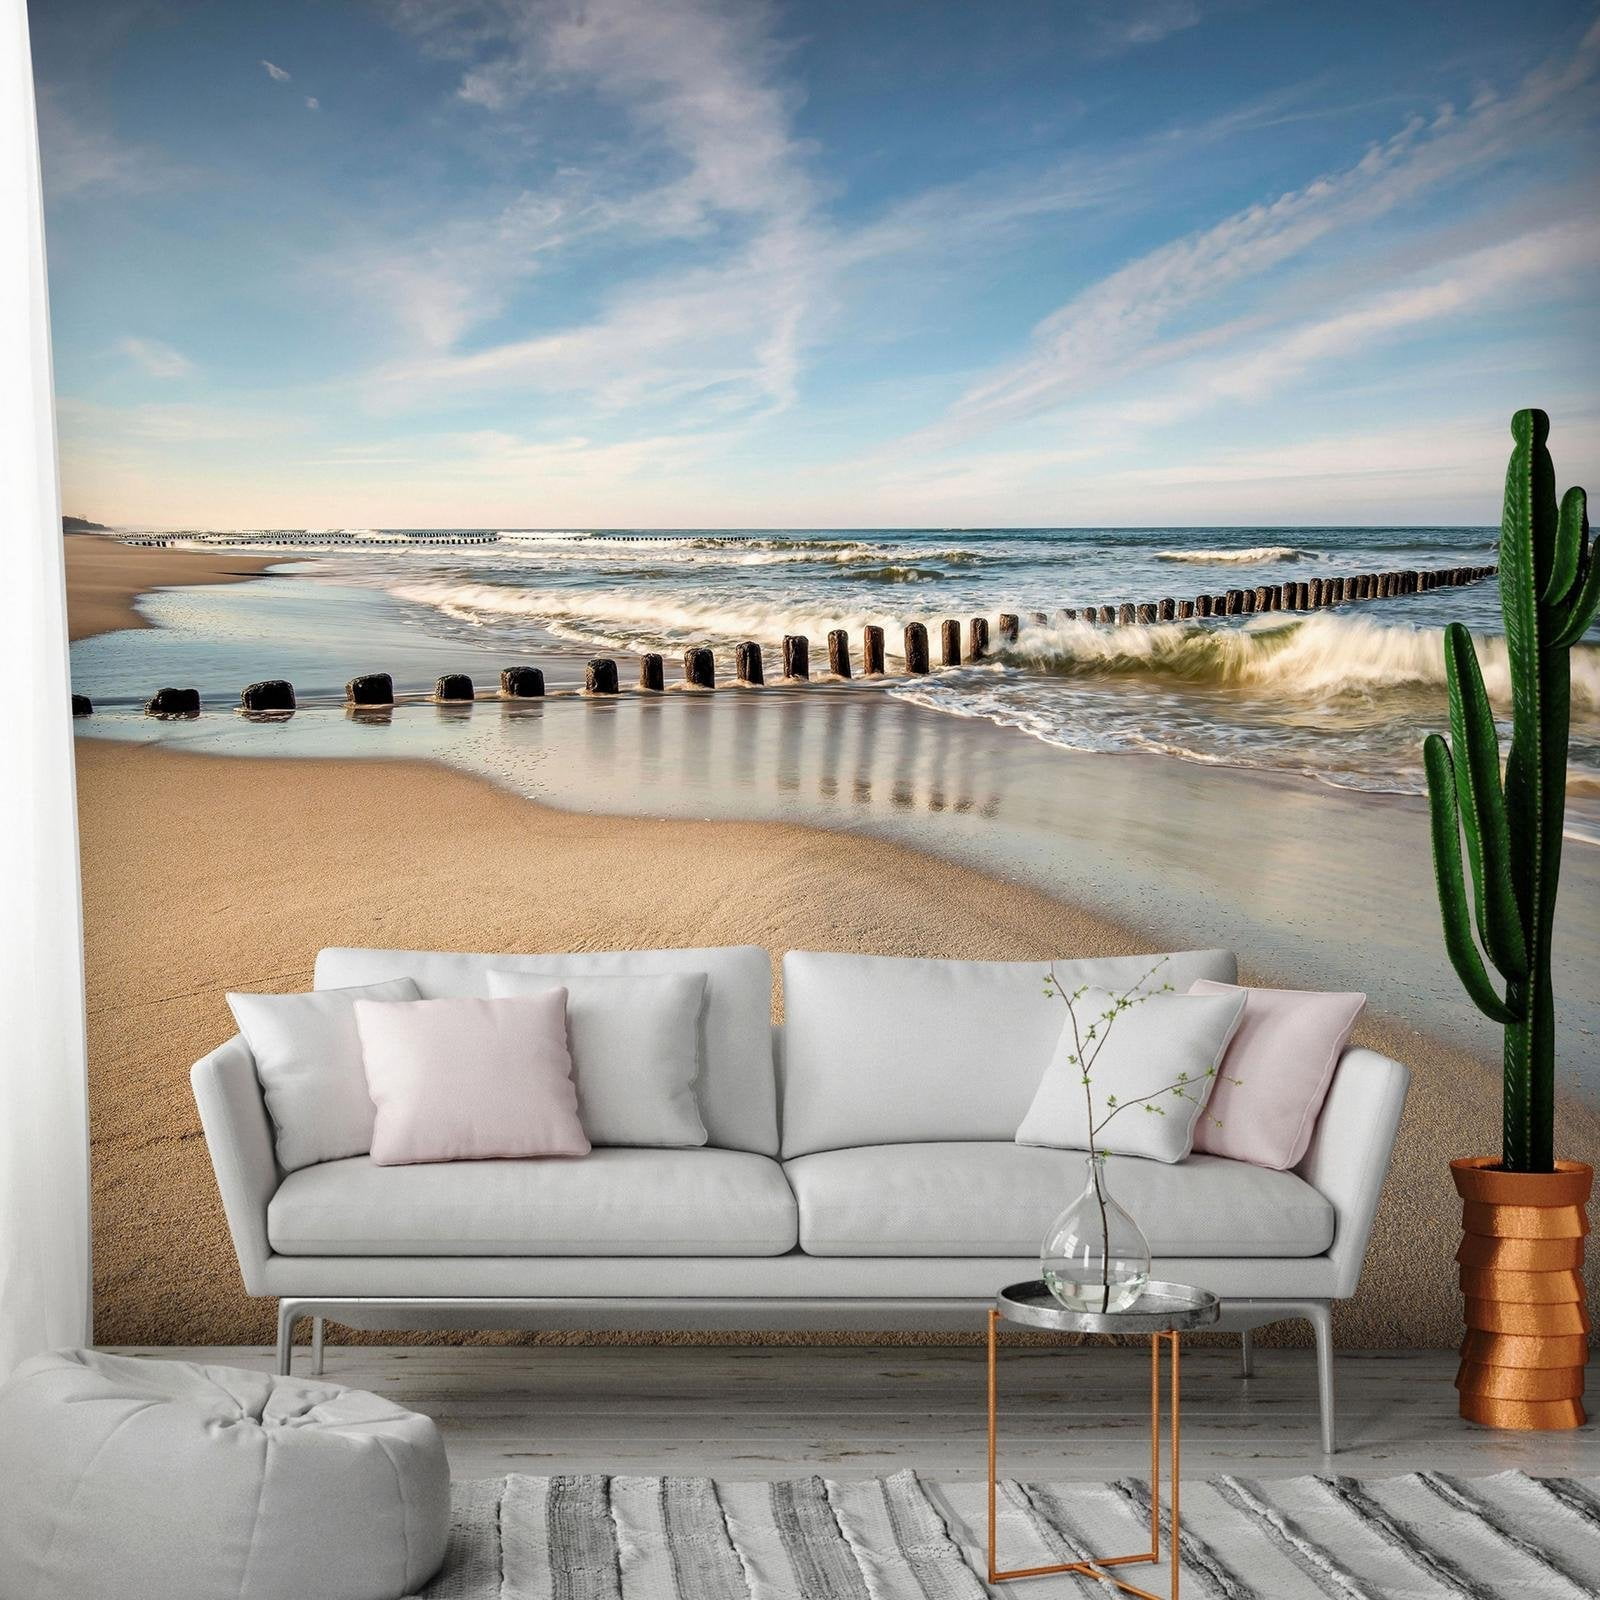 Tiptophomedecor Peel and Stick Beach Wallpaper Wall Mural - Sea Breeze -  Removable Wall Decals